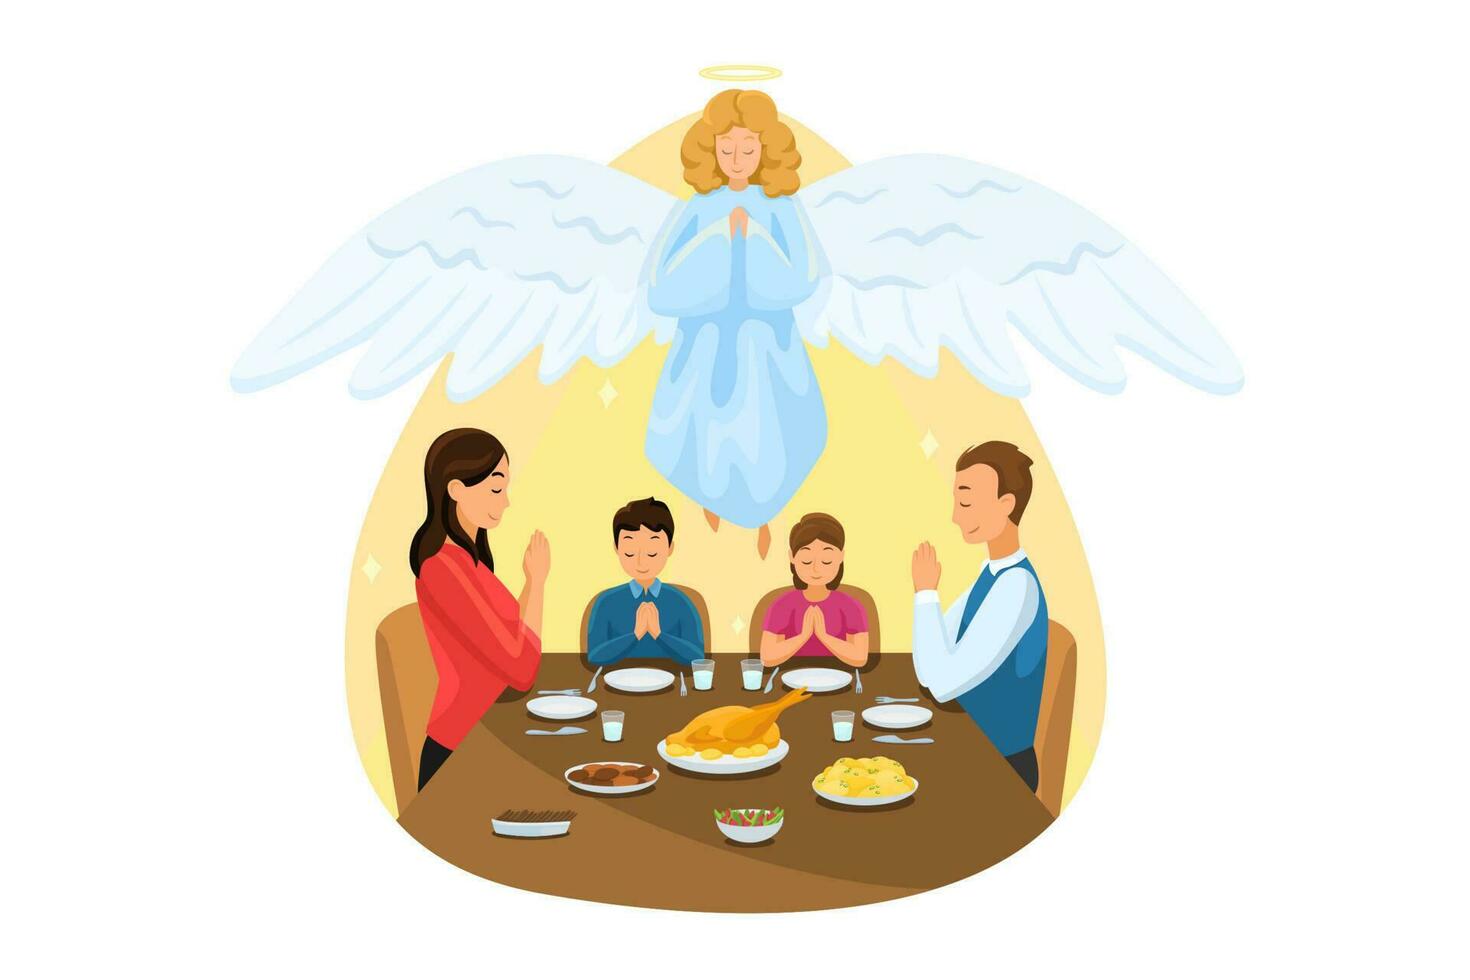 Christianity, religion, meal, protection, prayer, care, worship, support concept vector